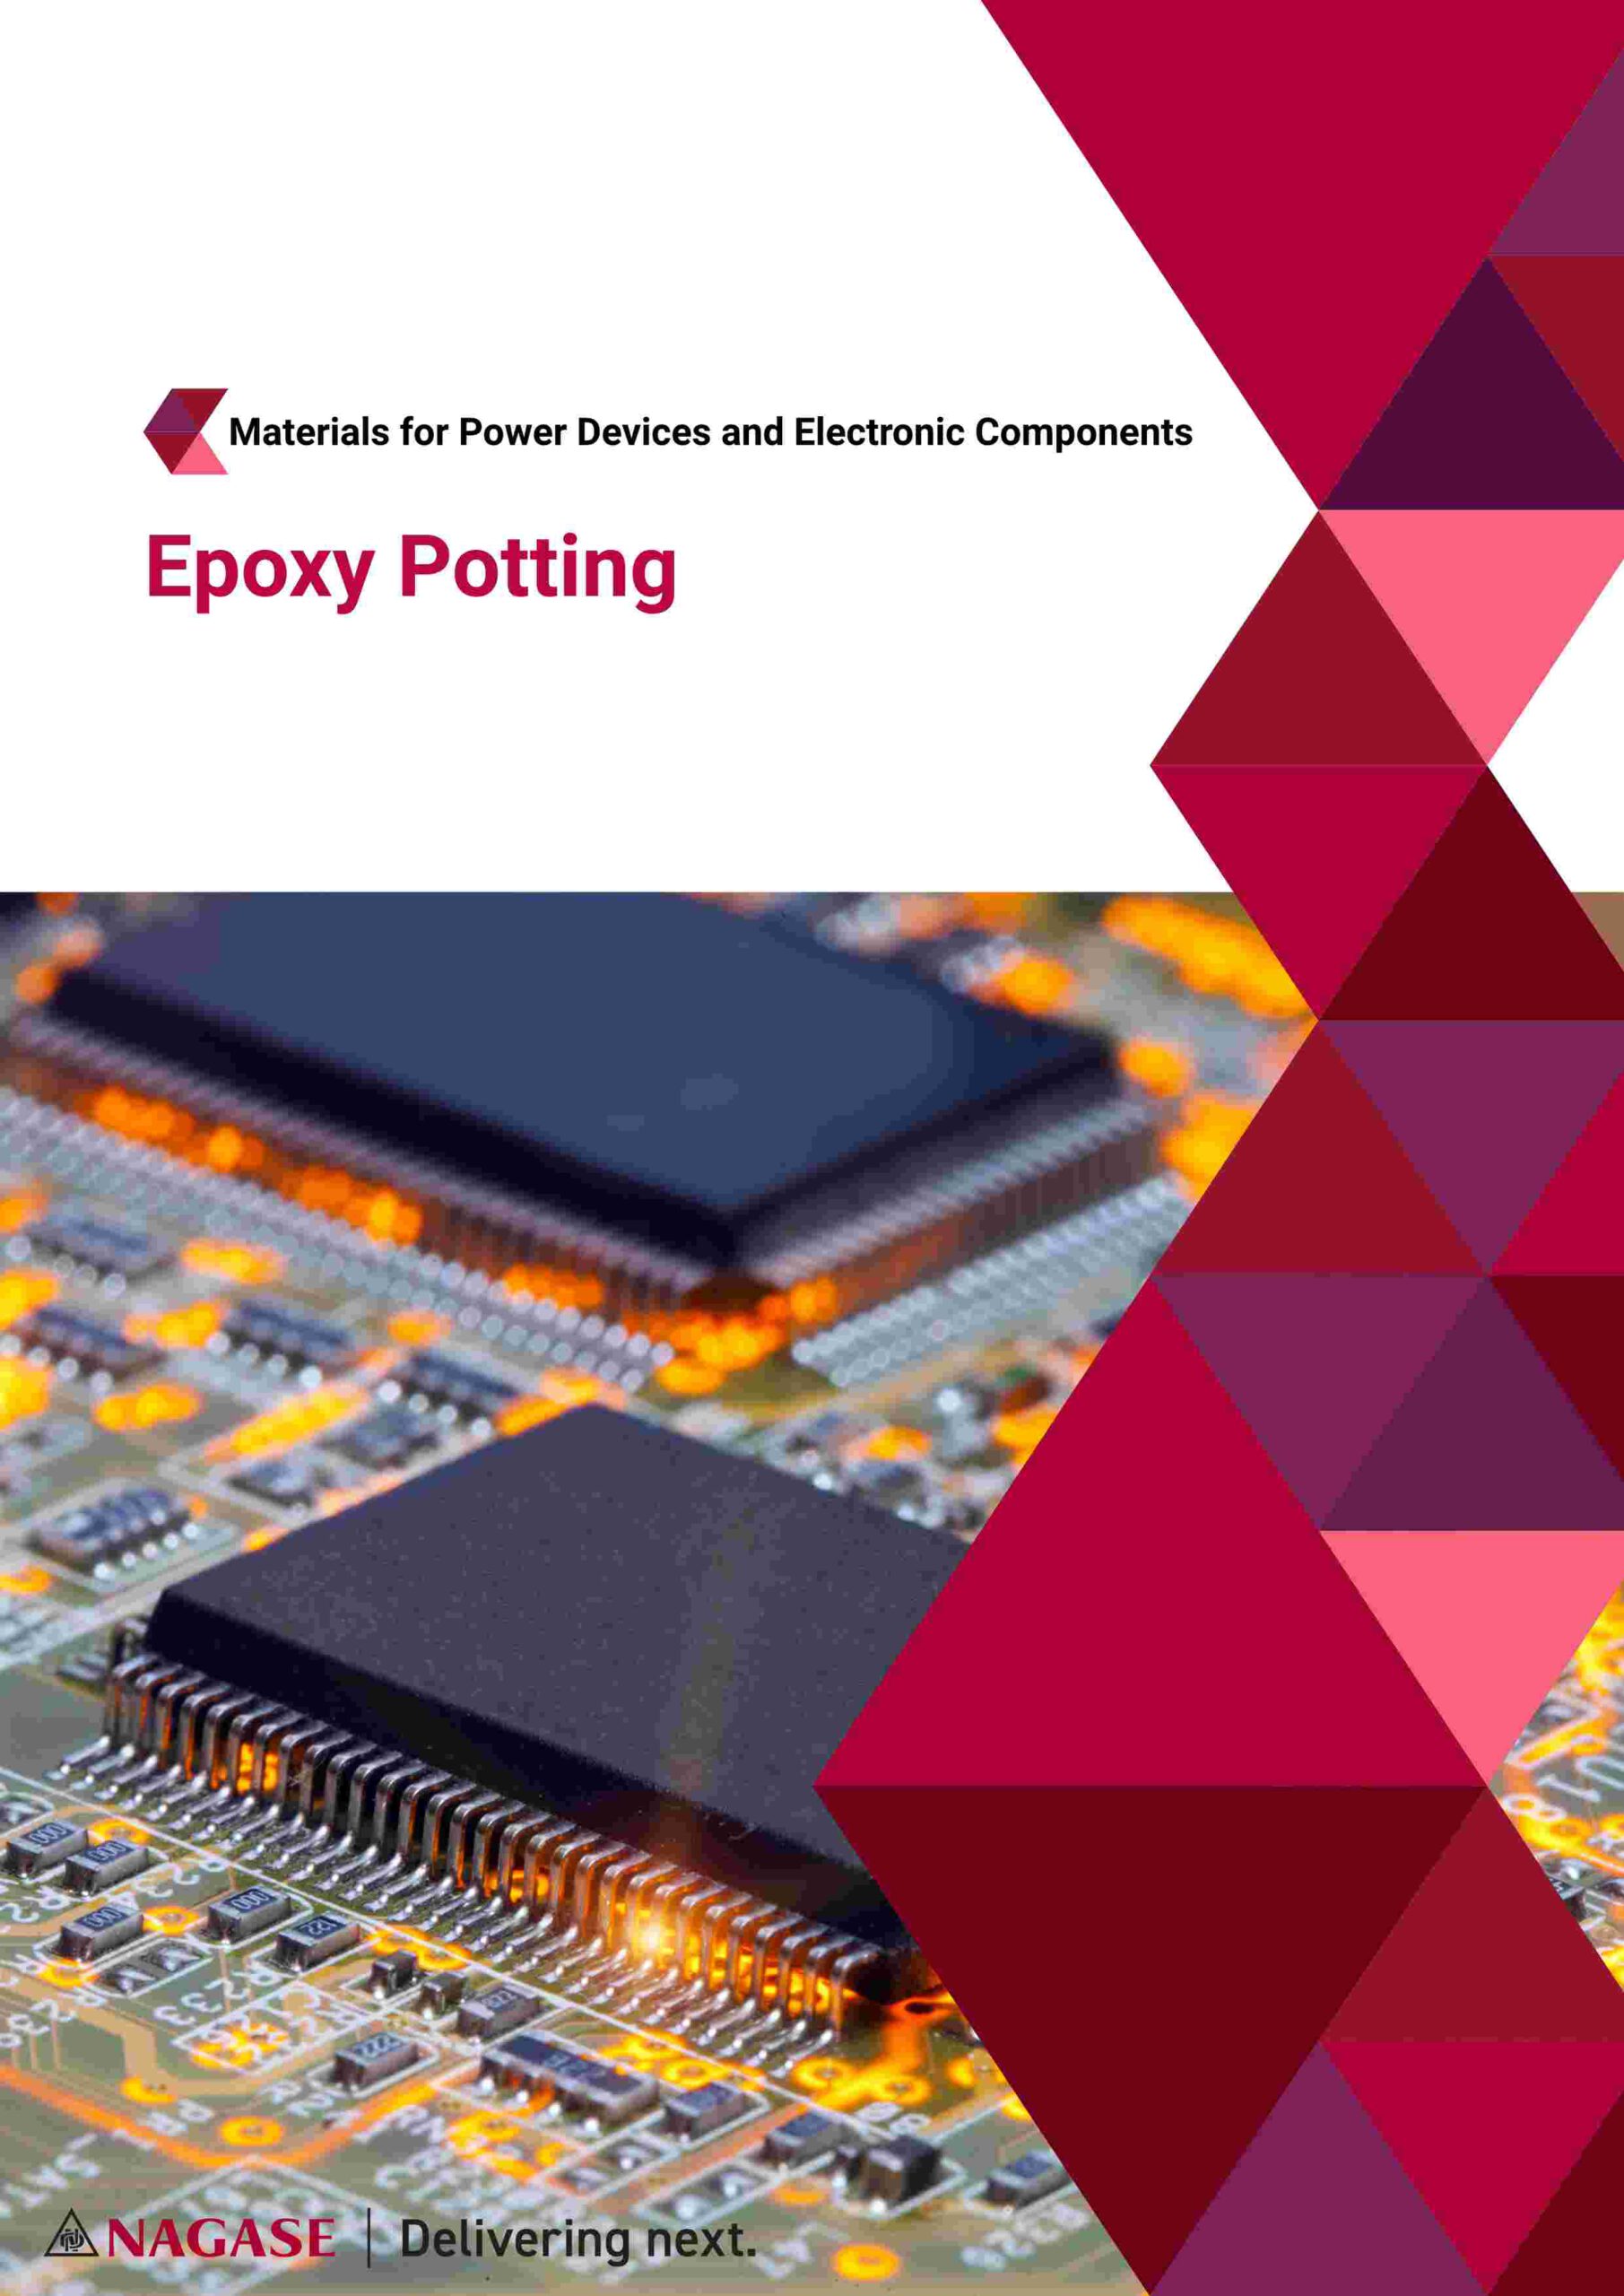 Product Flyer for Epoxy Potting Resings